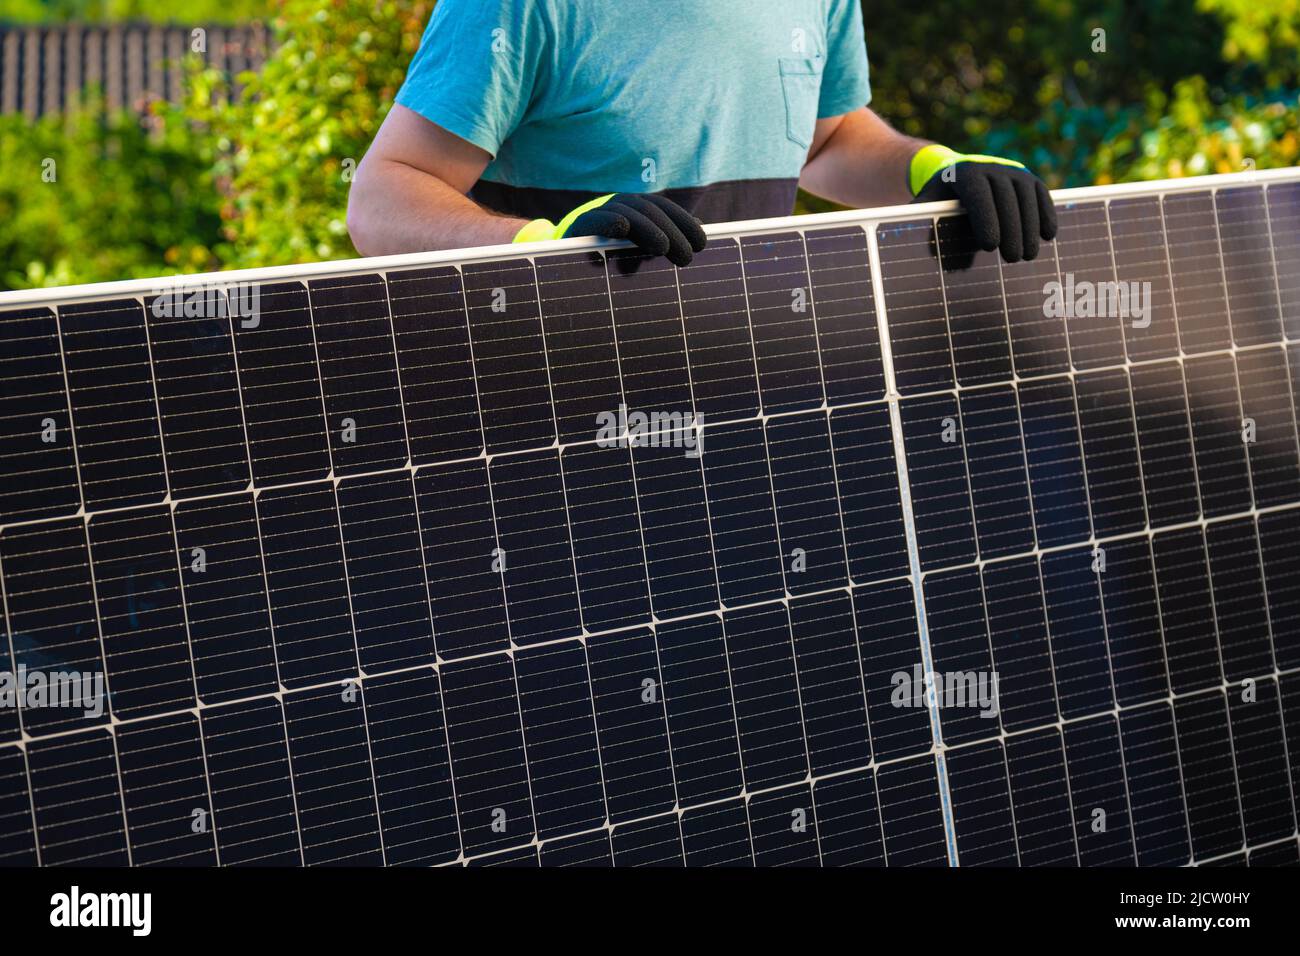 Solar energy.Green energy. Solar panel in the hands of a worker . Fitting and installation of solar panels.renewable energy.alternative energy .solar Stock Photo